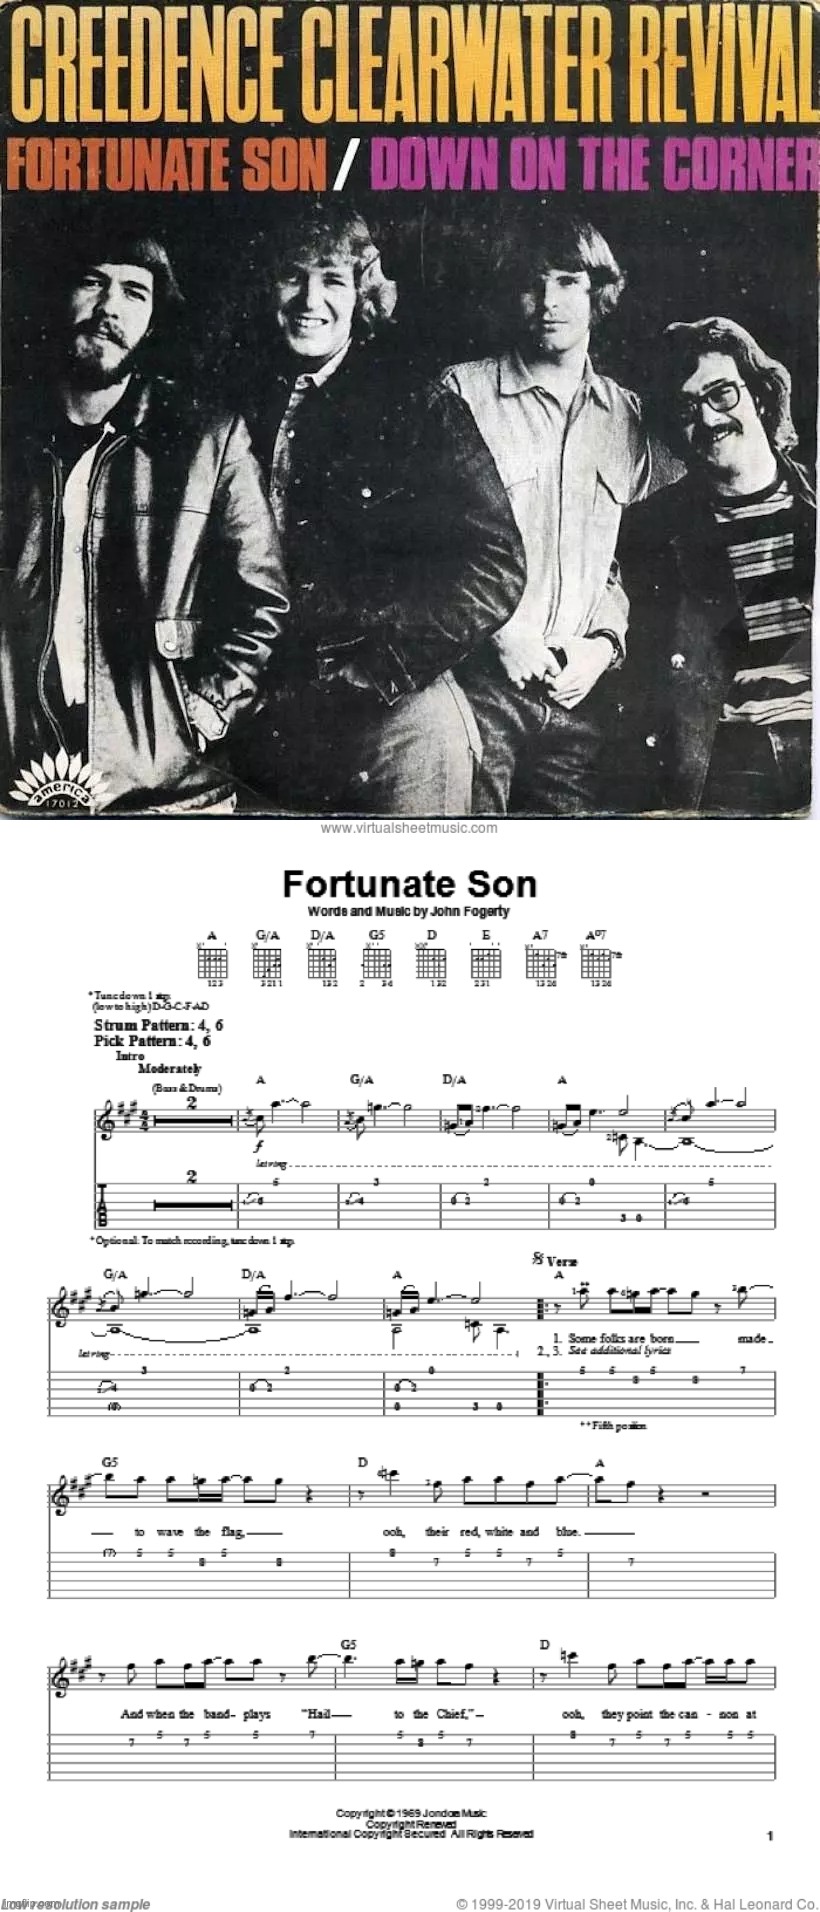 Cringing at right-wing appropriation of left-wing anthems, going on since Reagan. What can we say, our culture is cooler | image tagged in credence clearwater revival fortunate son,fortunate son sheet music | made w/ Imgflip meme maker